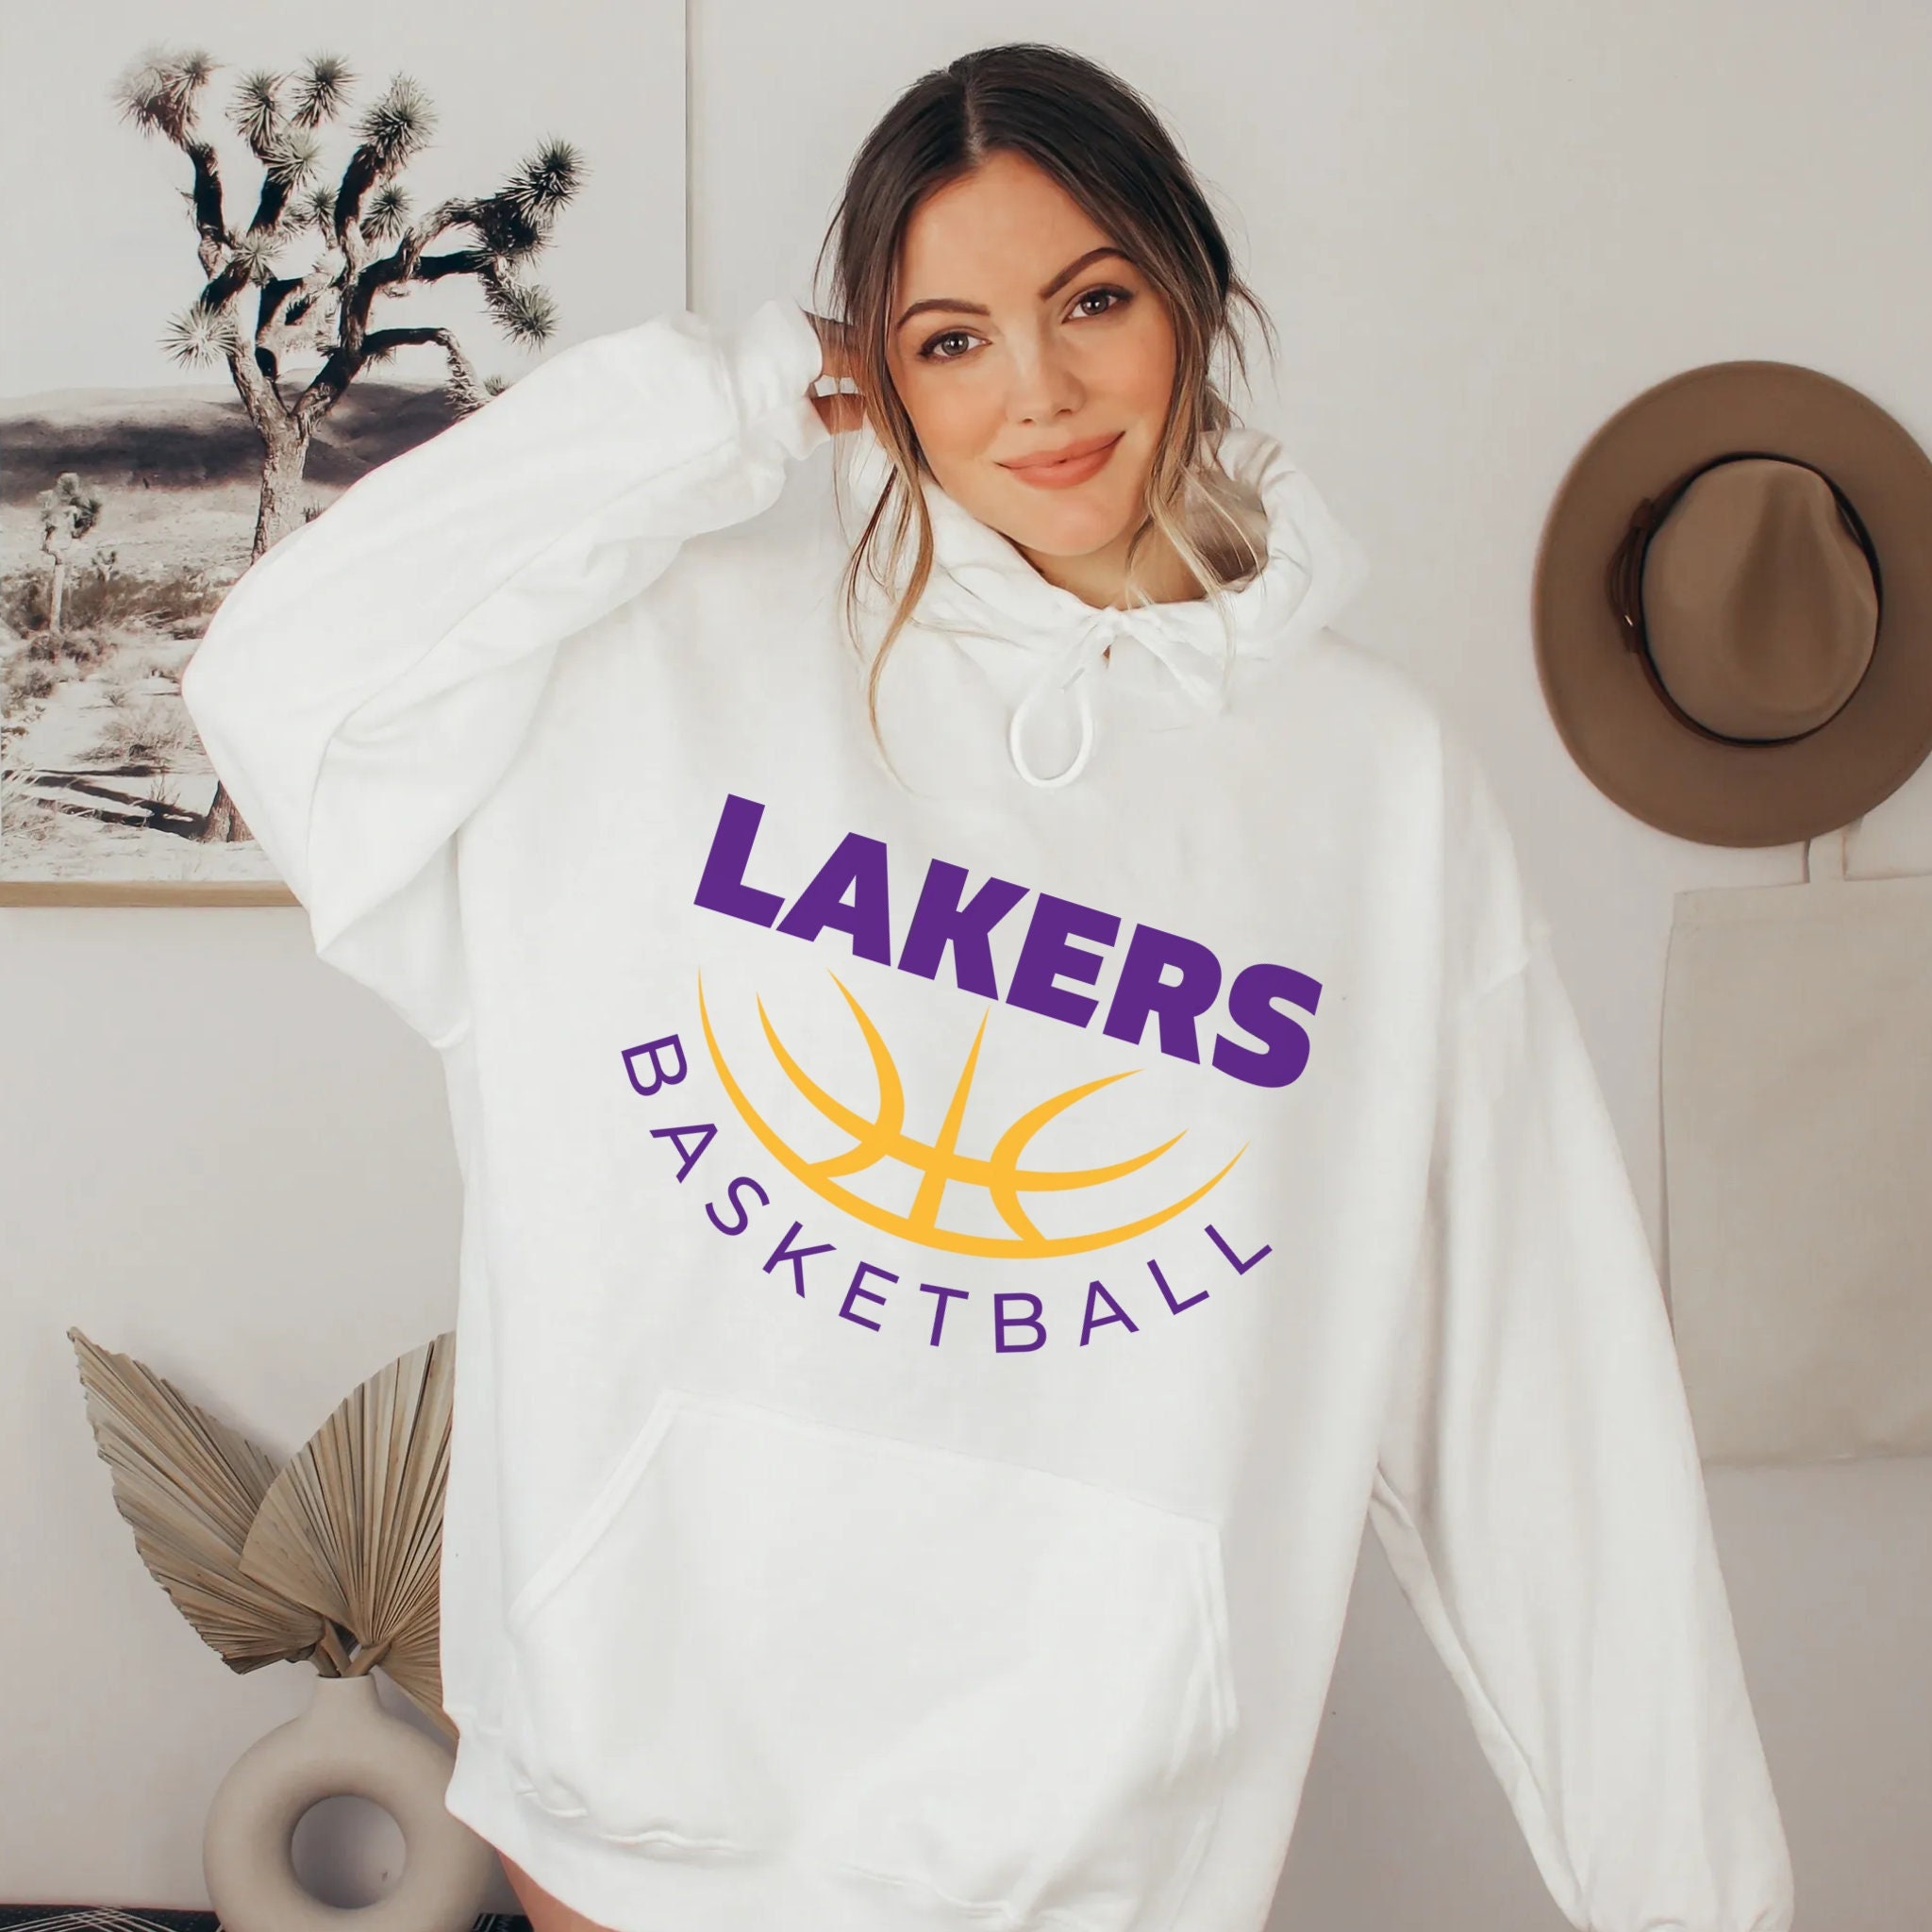 Pedro Pascal World Champions Los Angeles Lakers 2000 shirt, hoodie,  sweater, long sleeve and tank top